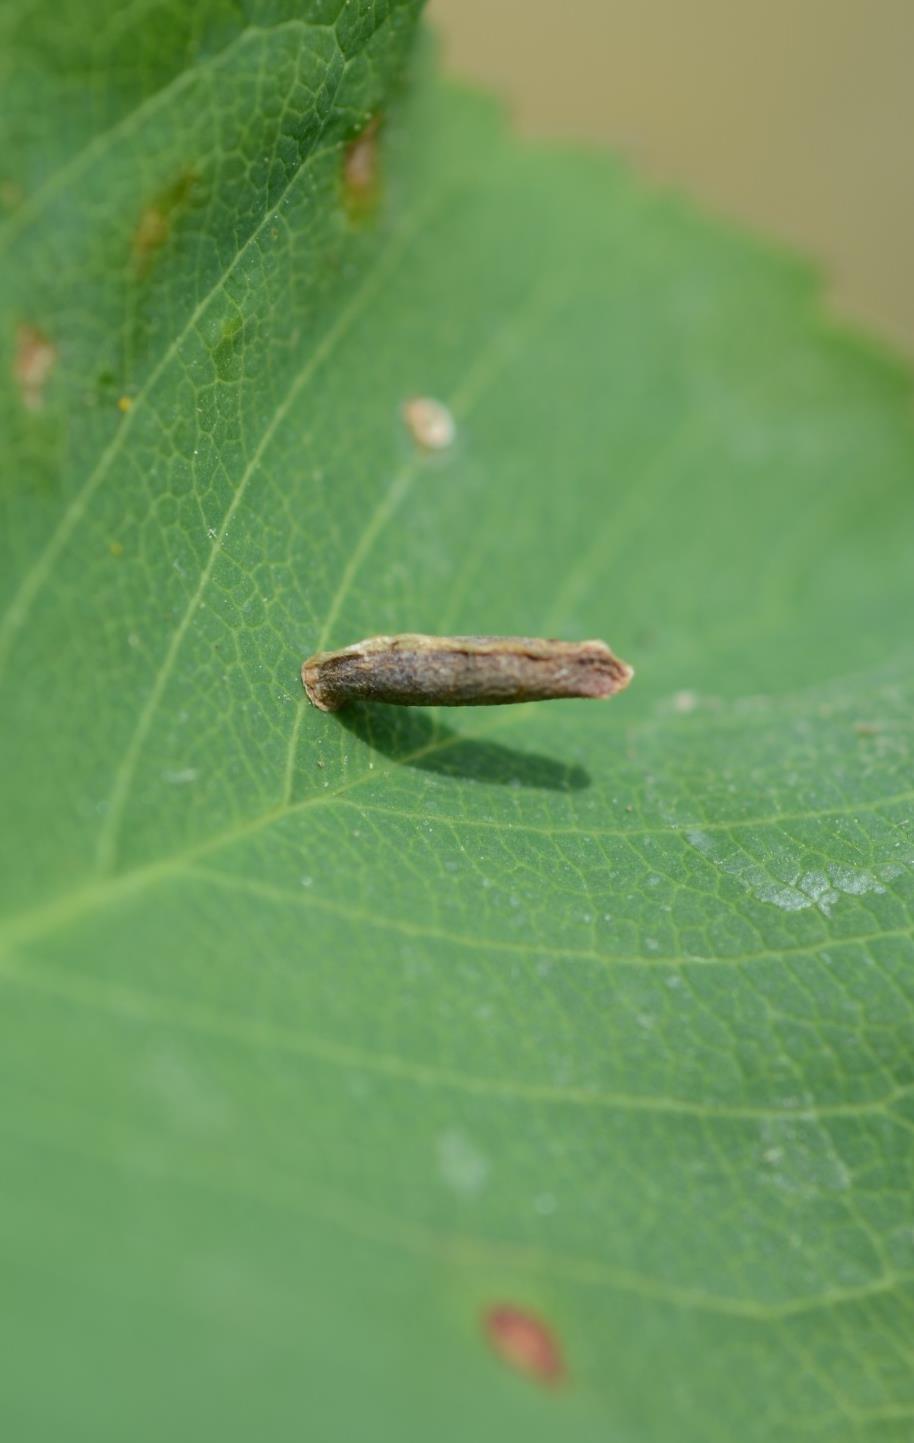 Casebearer moth Adults are small, delicate moths Larvae construct cases to protect their bodies Head and front legs